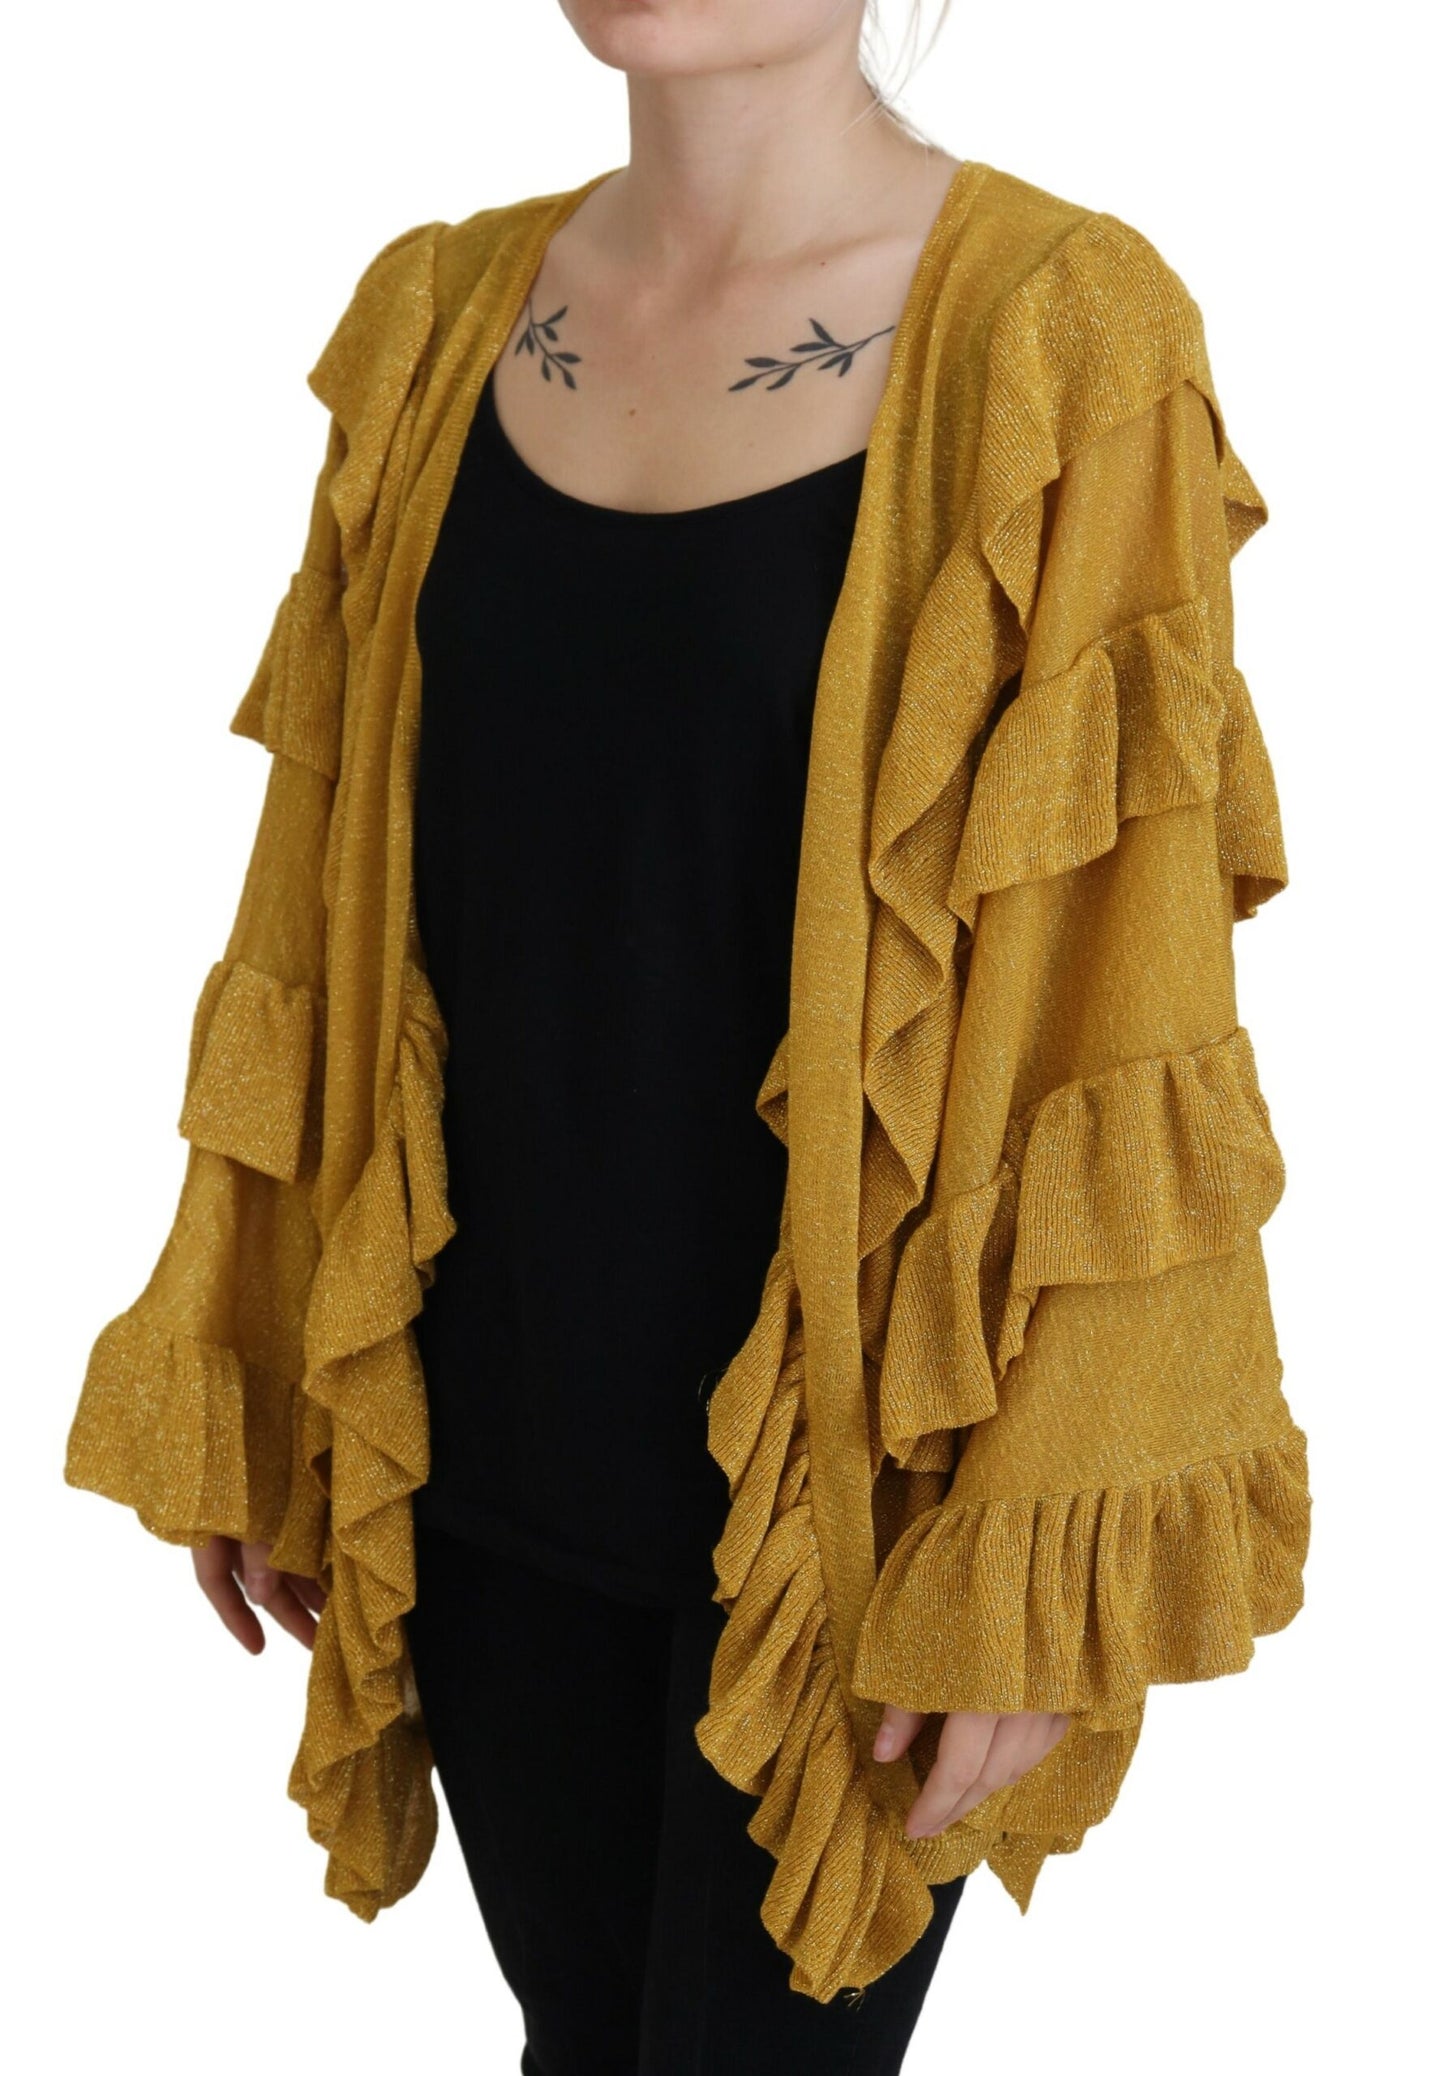 Gold Long Sleeves Ruffled Women Cardigan Sweater - Designed by Aniye By Available to Buy at a Discounted Price on Moon Behind The Hill Online Designer Discount Store